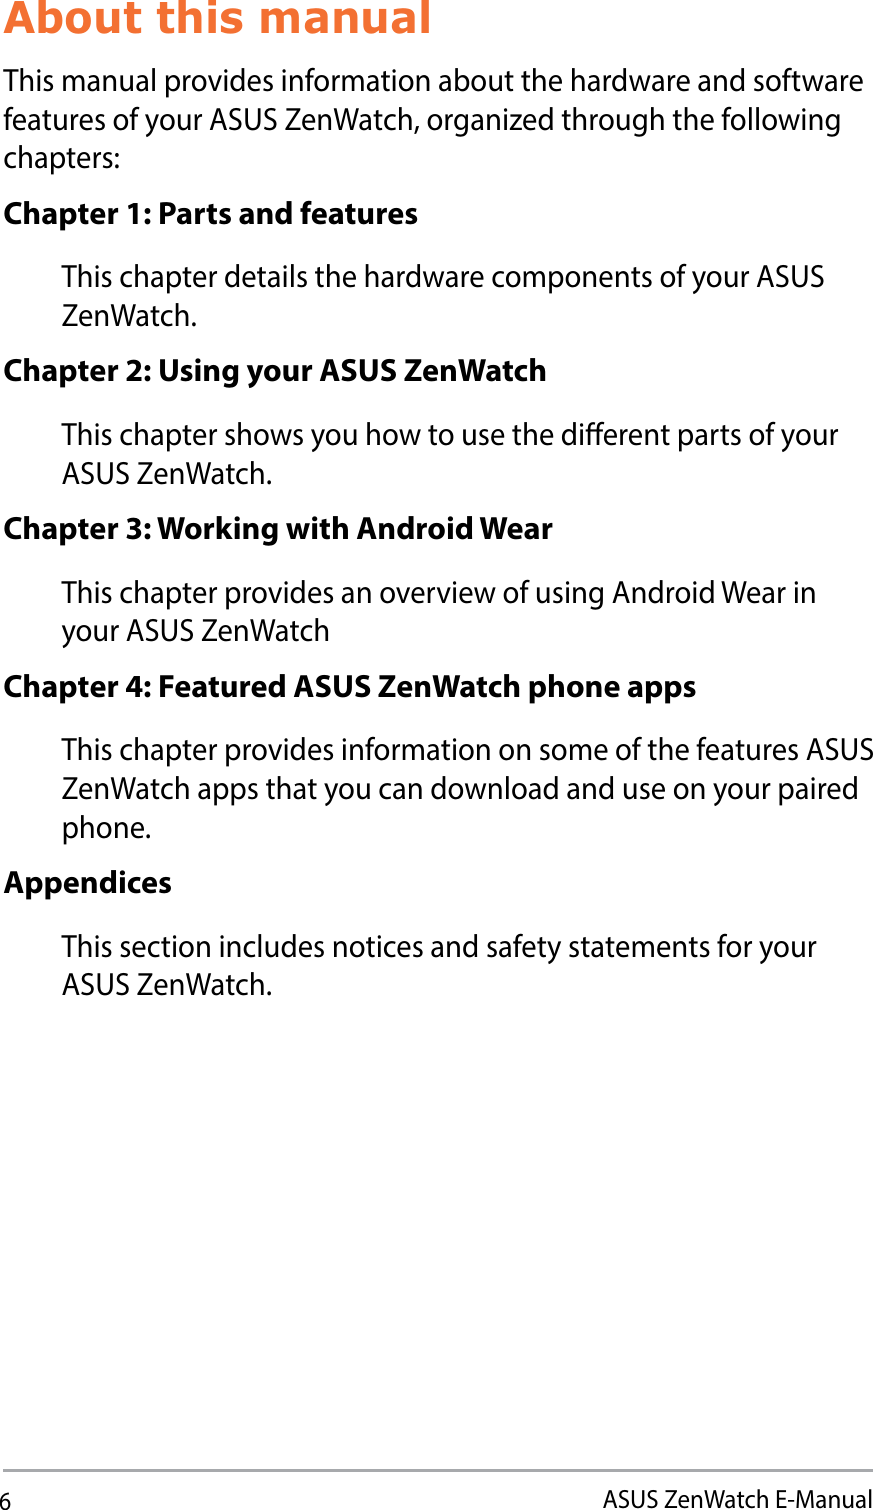 6ASUS ZenWatch E-ManualAbout this manualThis manual provides information about the hardware and software features of your ASUS ZenWatch, organized through the following chapters:Chapter 1: Parts and featuresThis chapter details the hardware components of your ASUS ZenWatch.Chapter 2: Using your ASUS ZenWatchThis chapter shows you how to use the dierent parts of your ASUS ZenWatch.Chapter 3: Working with Android WearThis chapter provides an overview of using Android Wear in your ASUS ZenWatchChapter 4: Featured ASUS ZenWatch phone appsThis chapter provides information on some of the features ASUS ZenWatch apps that you can download and use on your paired phone.AppendicesThis section includes notices and safety statements for your ASUS ZenWatch.